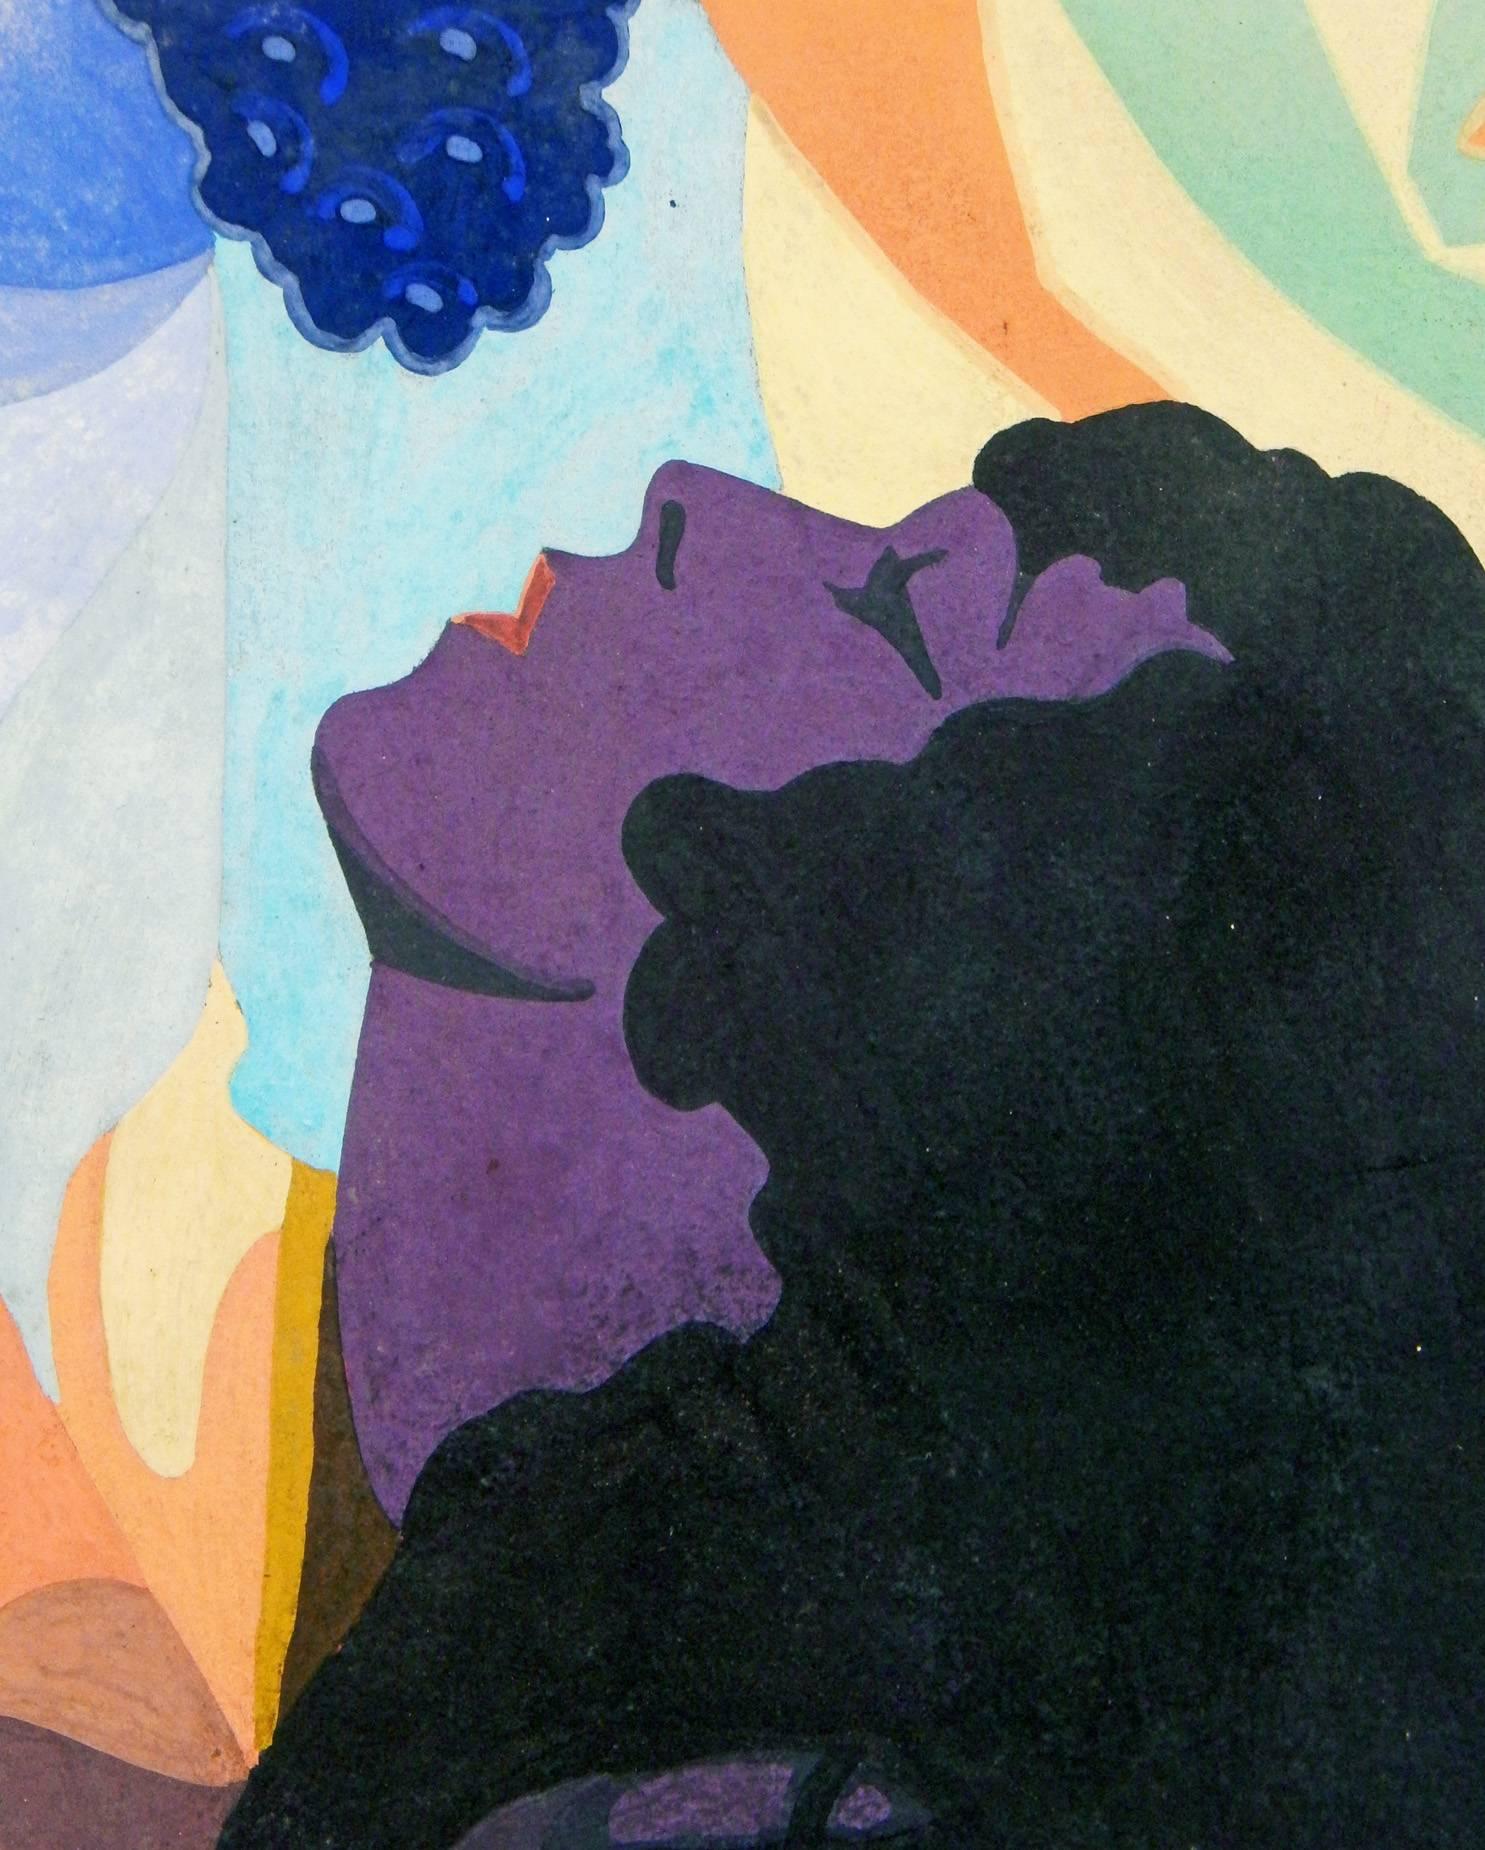 Graphically striking and boldly painted in a rich palette of purples, blues and oranges, this high style Art Deco painting by M. H. Forster depicts a female figure with curling tendrils of hair, her face upturned to a cluster of grapes overhead. The